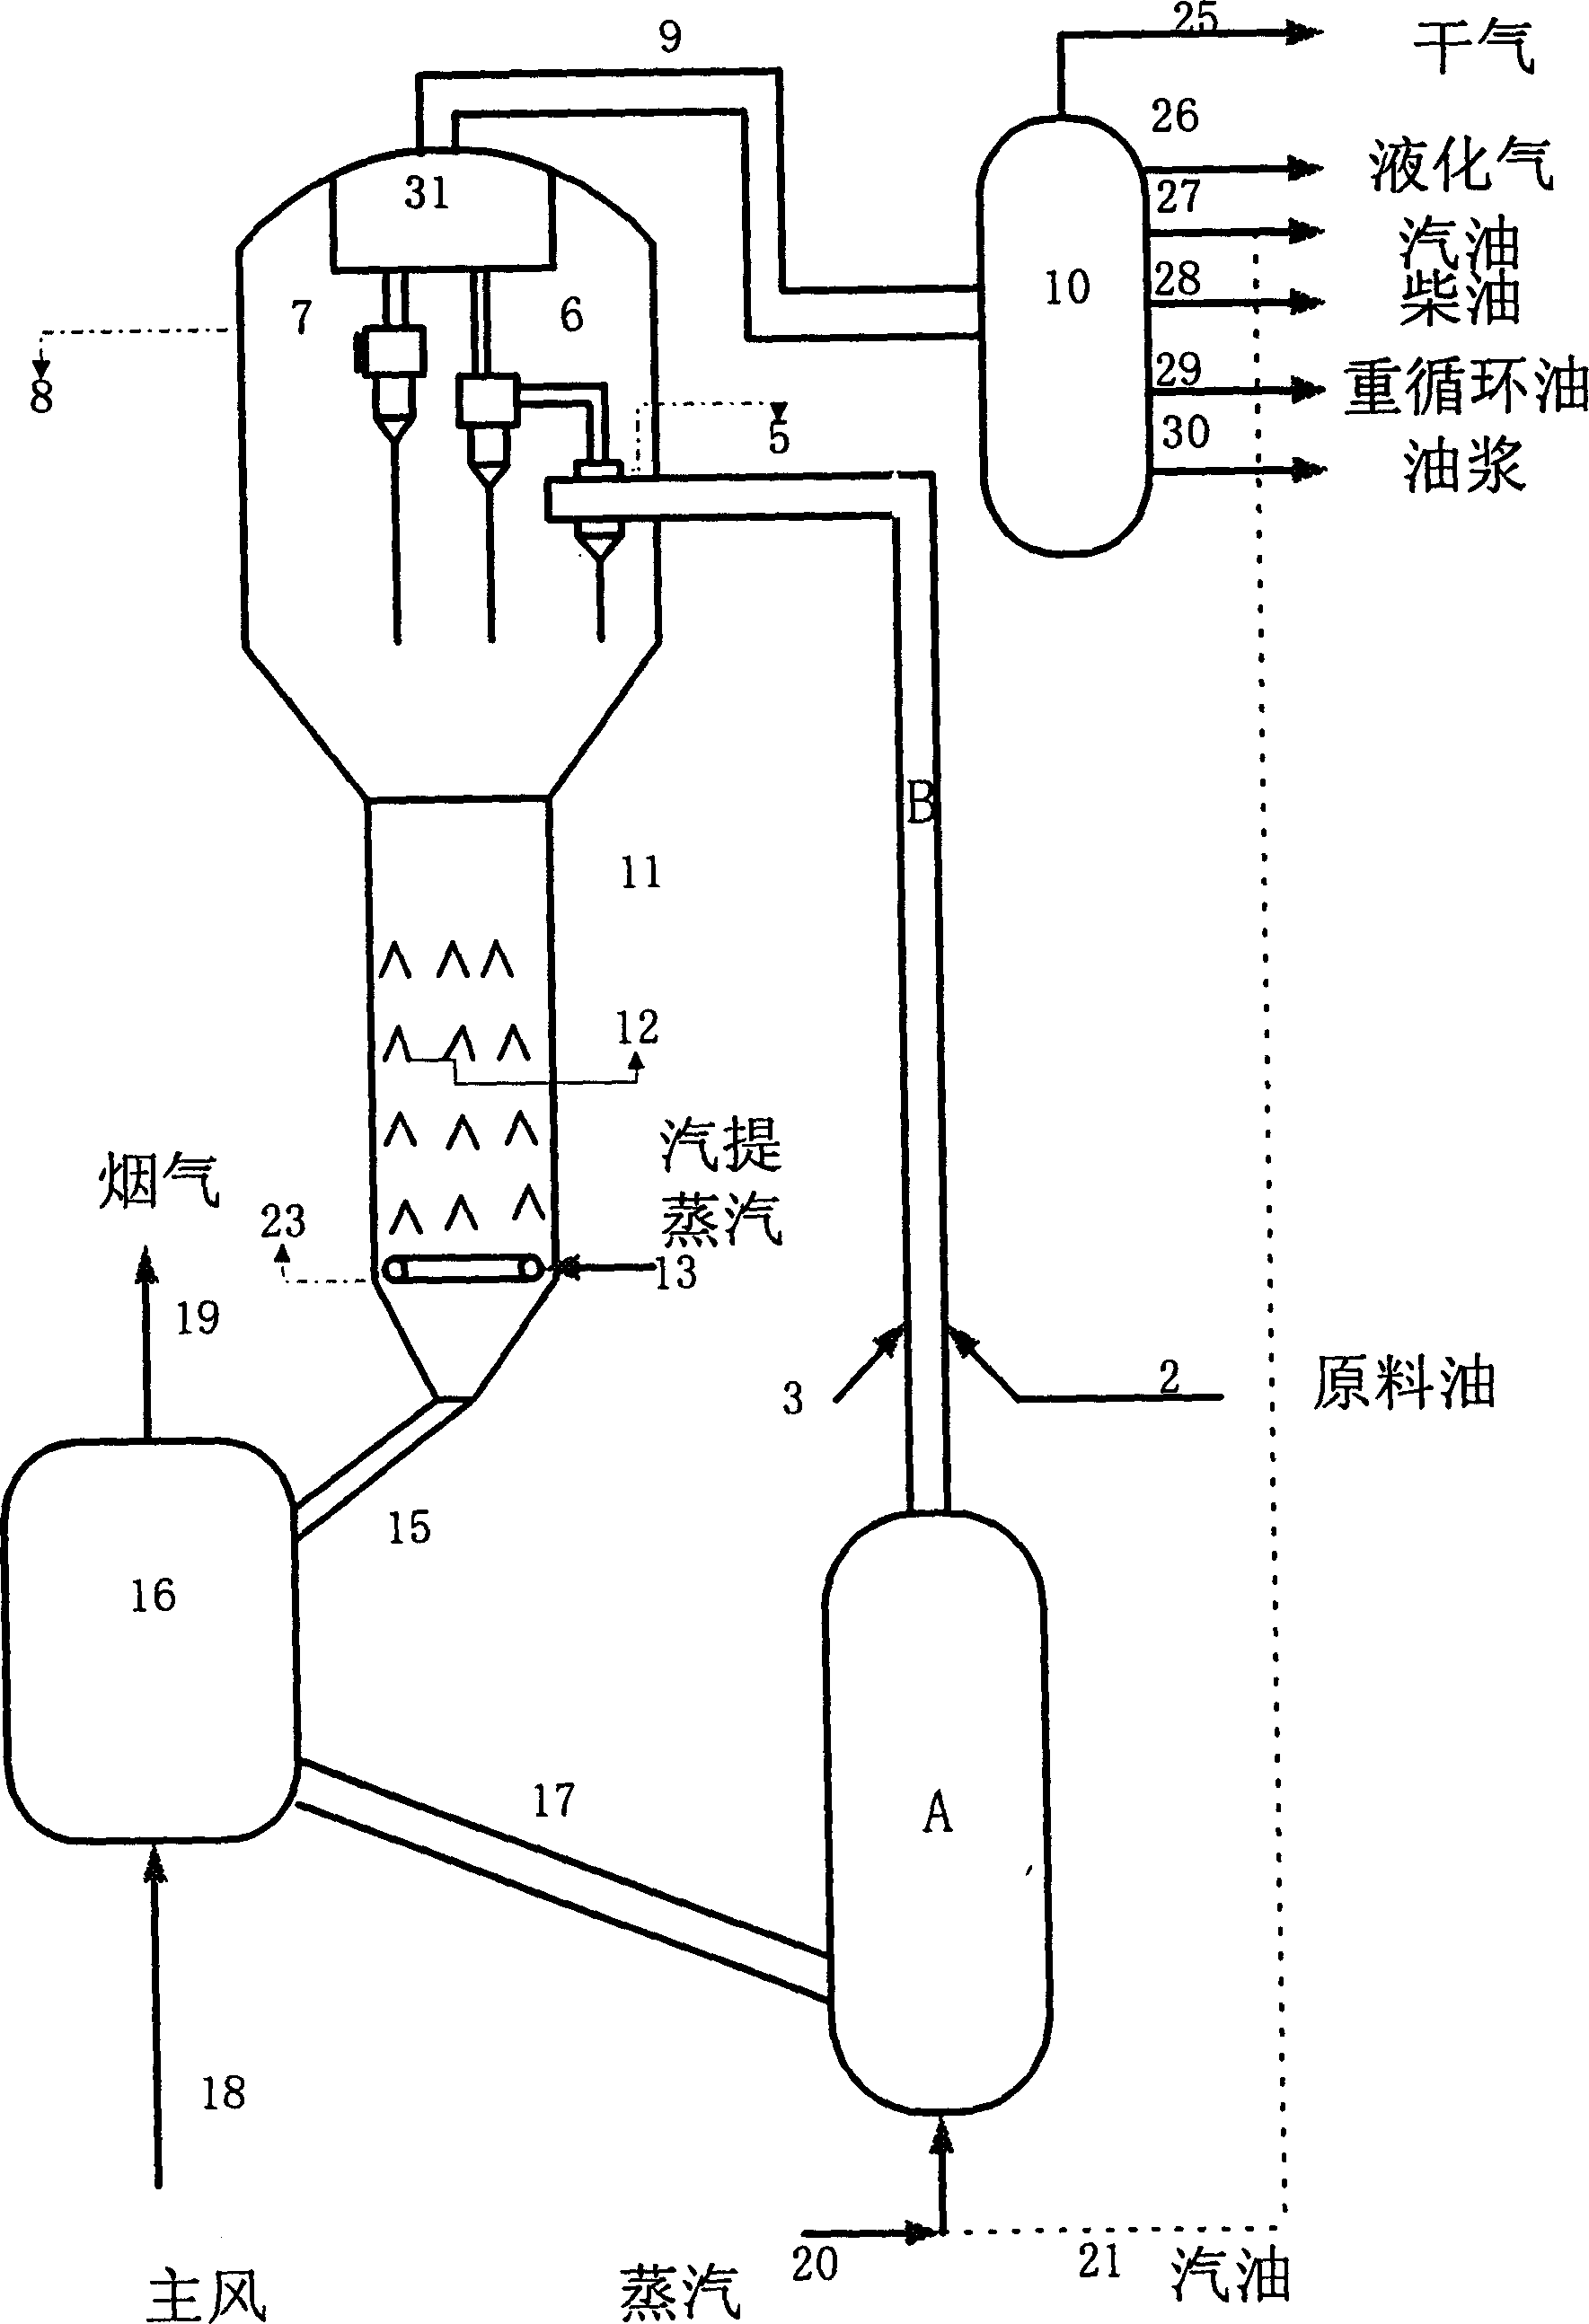 Method for catalyzing and transfering petroleum hydrocarbon compounds by using reactor with dual reacting regions